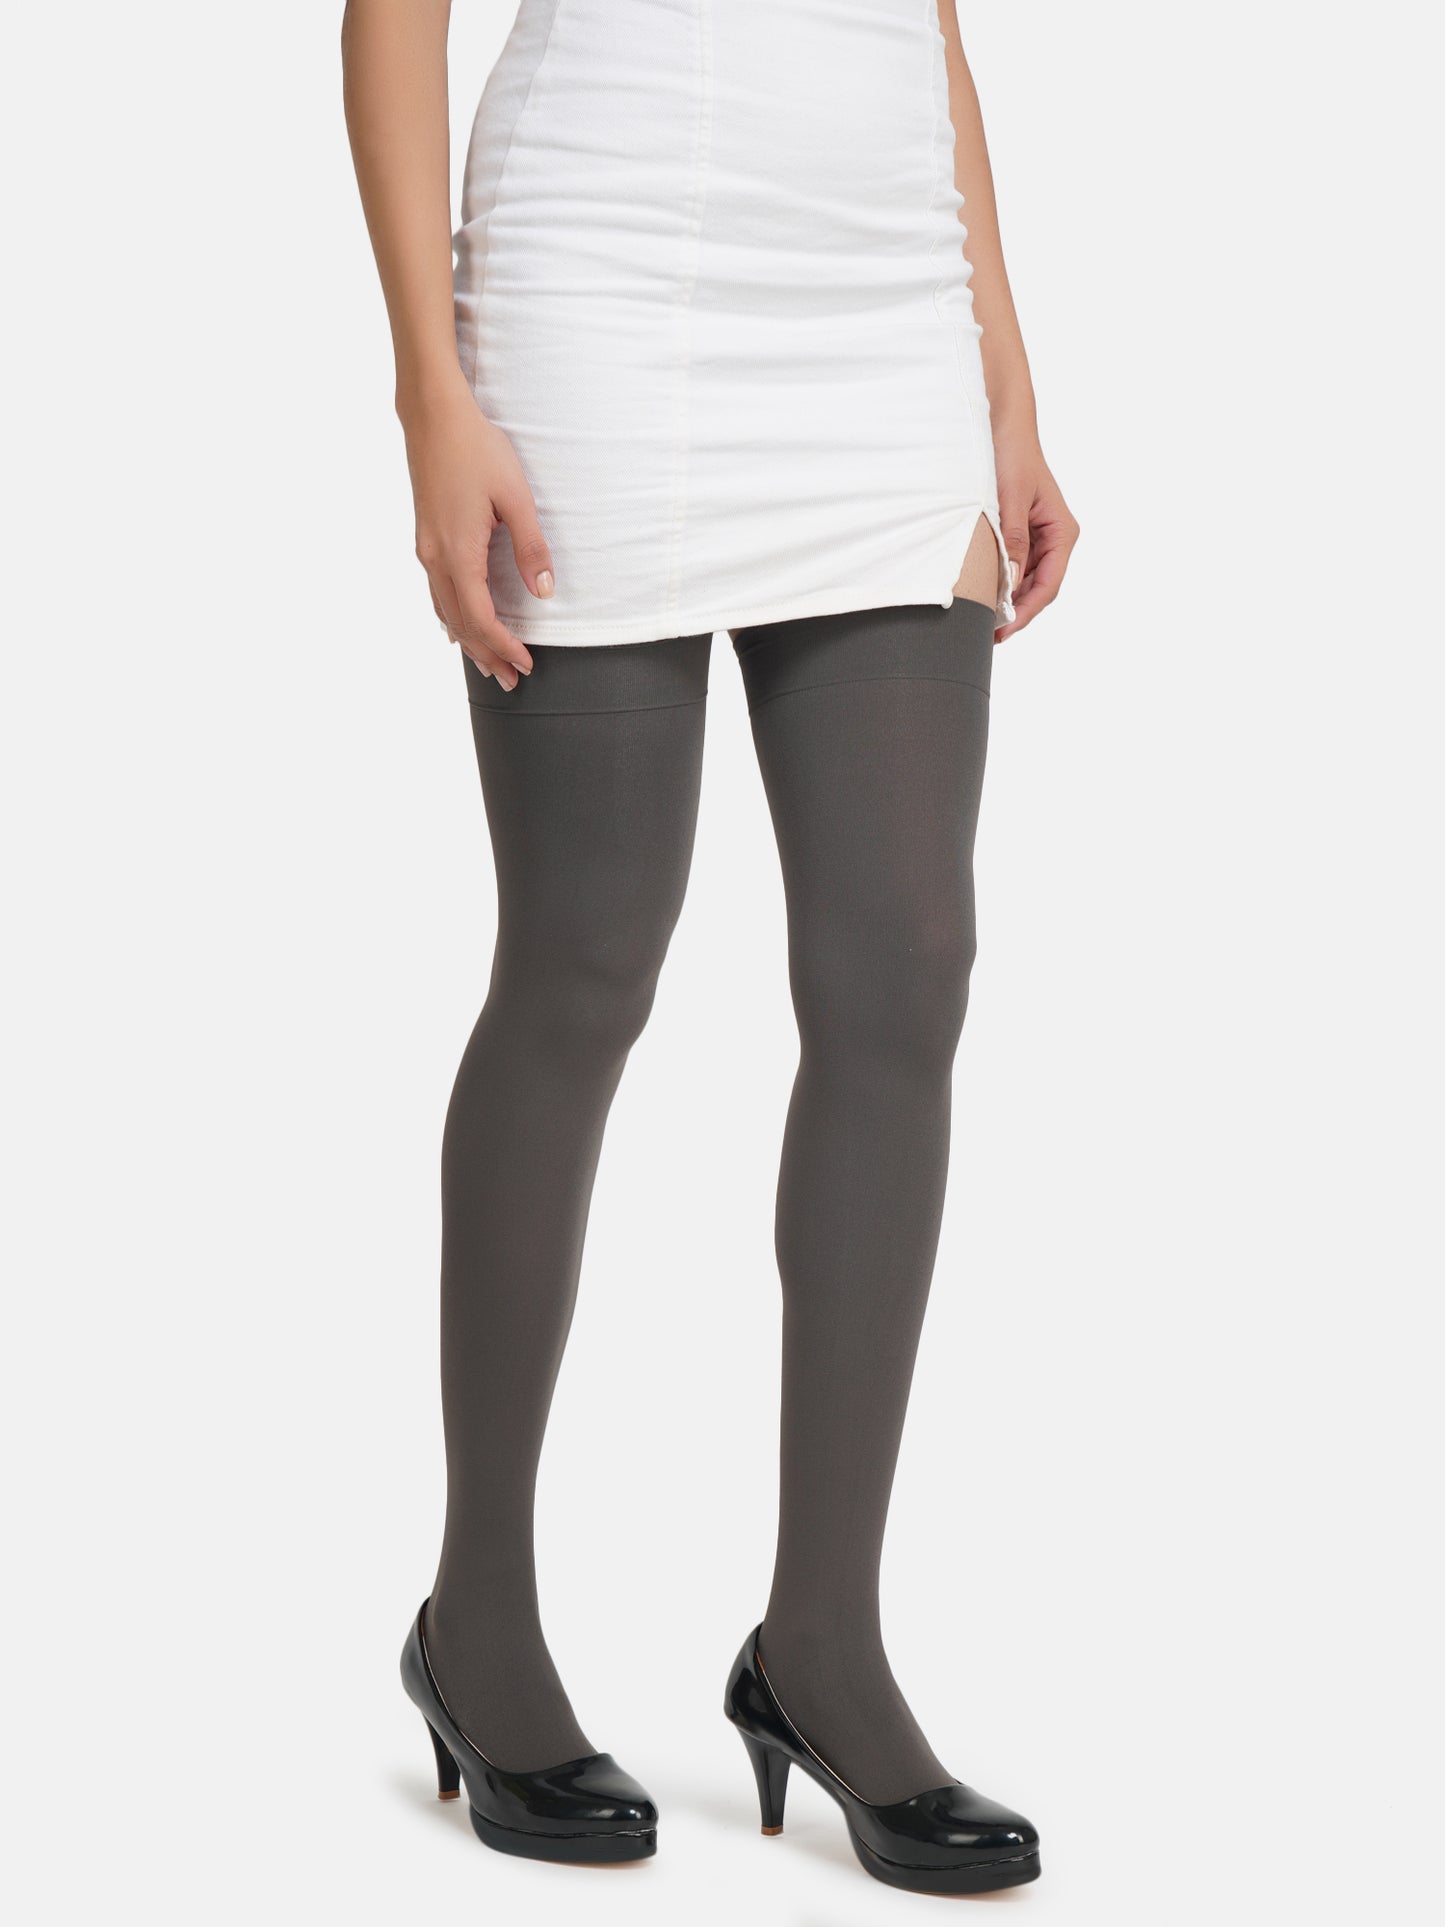 Charcoal Grey Thigh Stocking